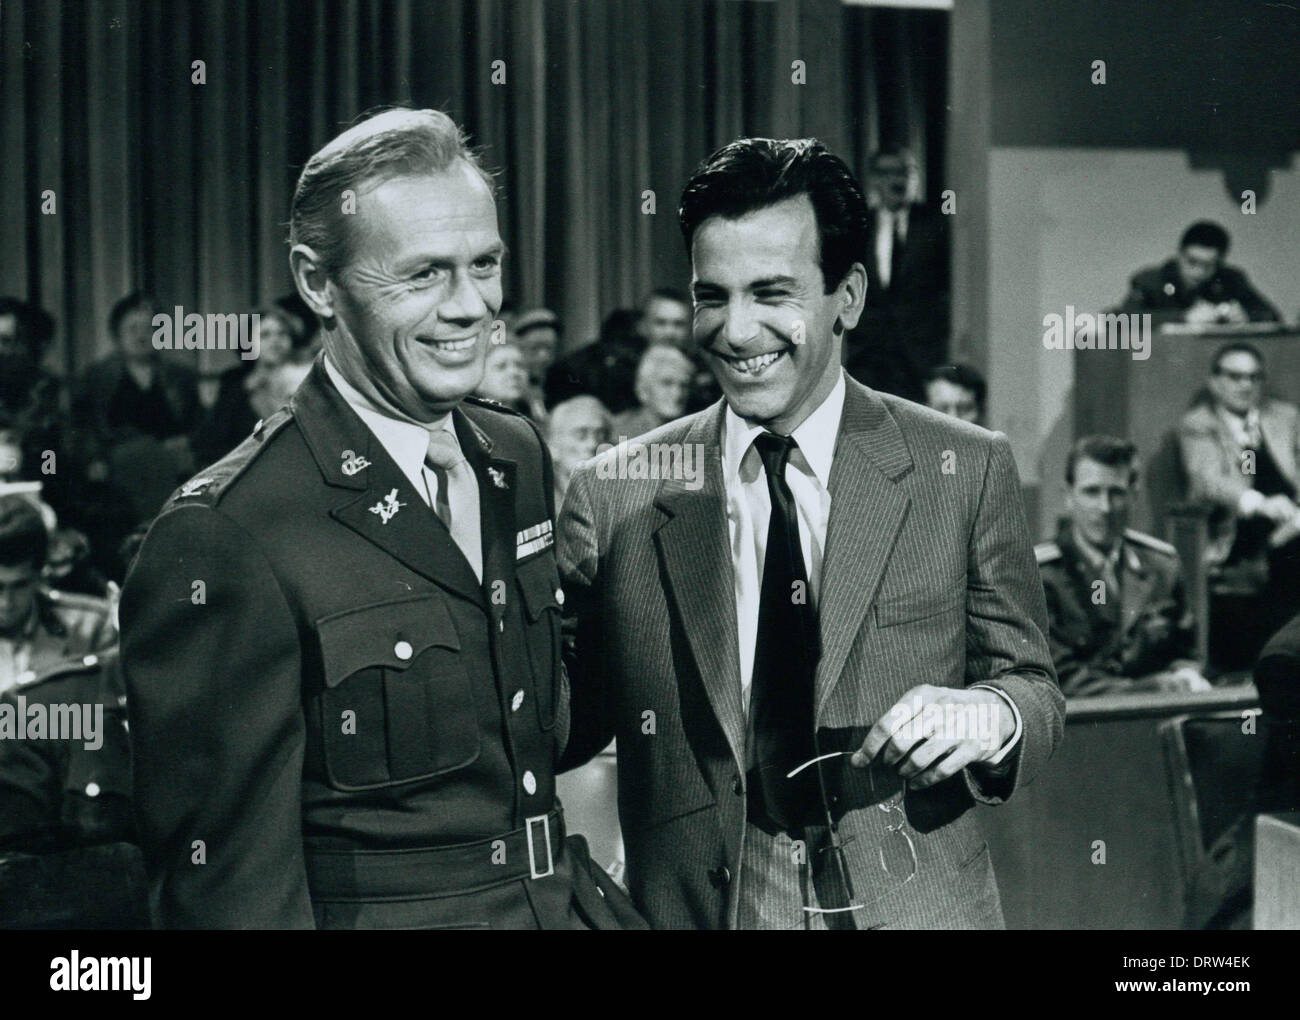 Austrian actor Maximilian Schell, who won the Academy Award for best actor in 1961 for his portrayal of a defense attorney in the drama Judgment at Nuremberg, has died aged 83. The actor's death was announced Saturday by his agent, who said that Schell died overnight at a hospital in Innsbruck following a 'sudden and serious illness'. PICTURED: 1961 - MAXIMILIAN SCHELL with RICHARD WIDMARK in 'Judgment at Nuremberg'. (Credit Image: © Globe Photos/ZUMApress.com) Stock Photo